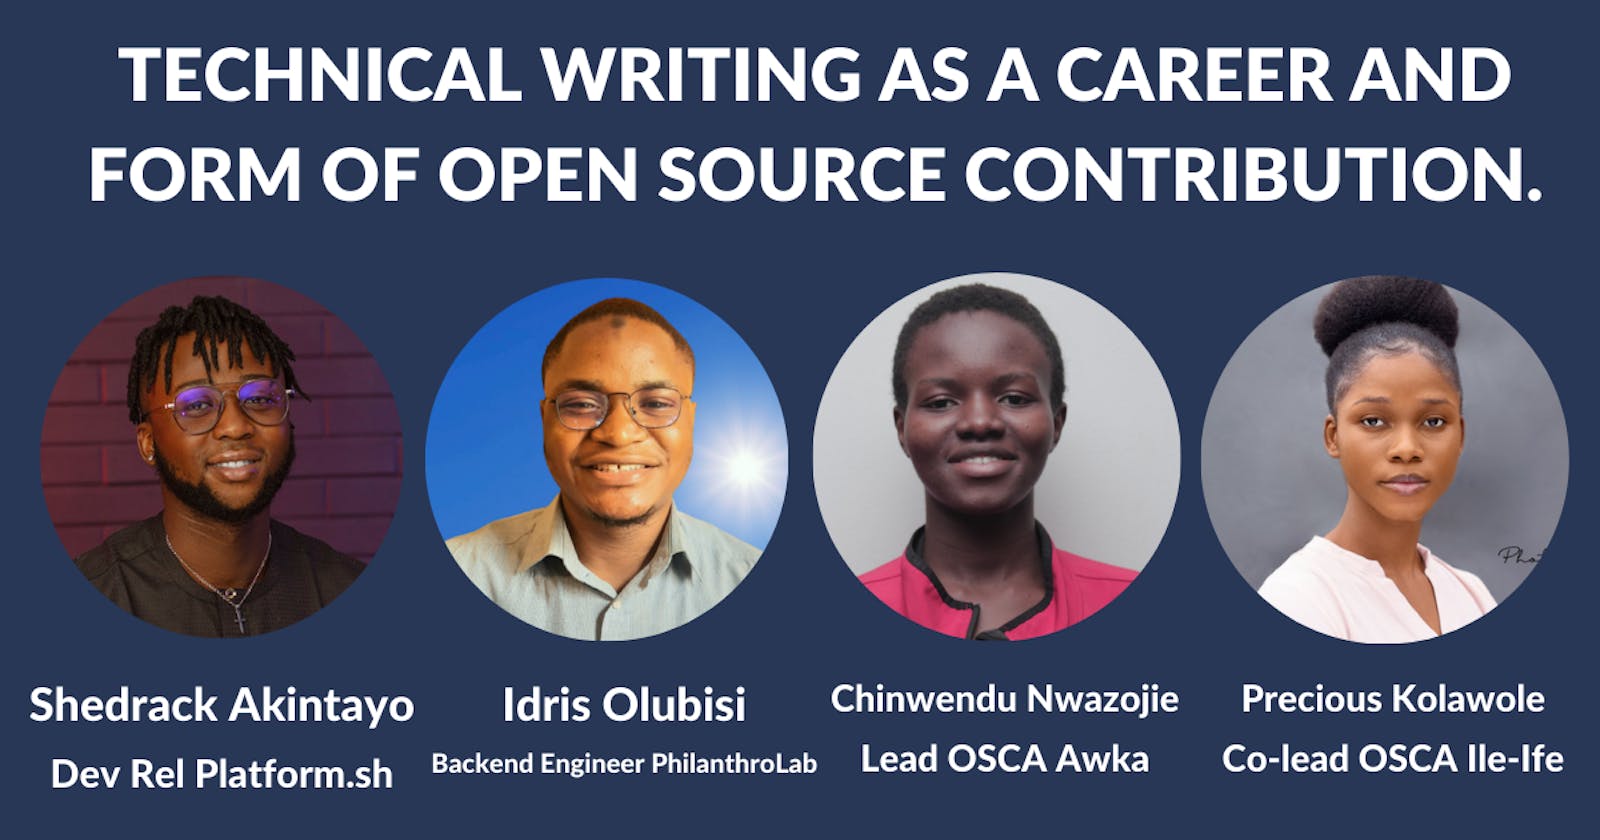 Technical Writing as a Career and form of Open Source Contribution